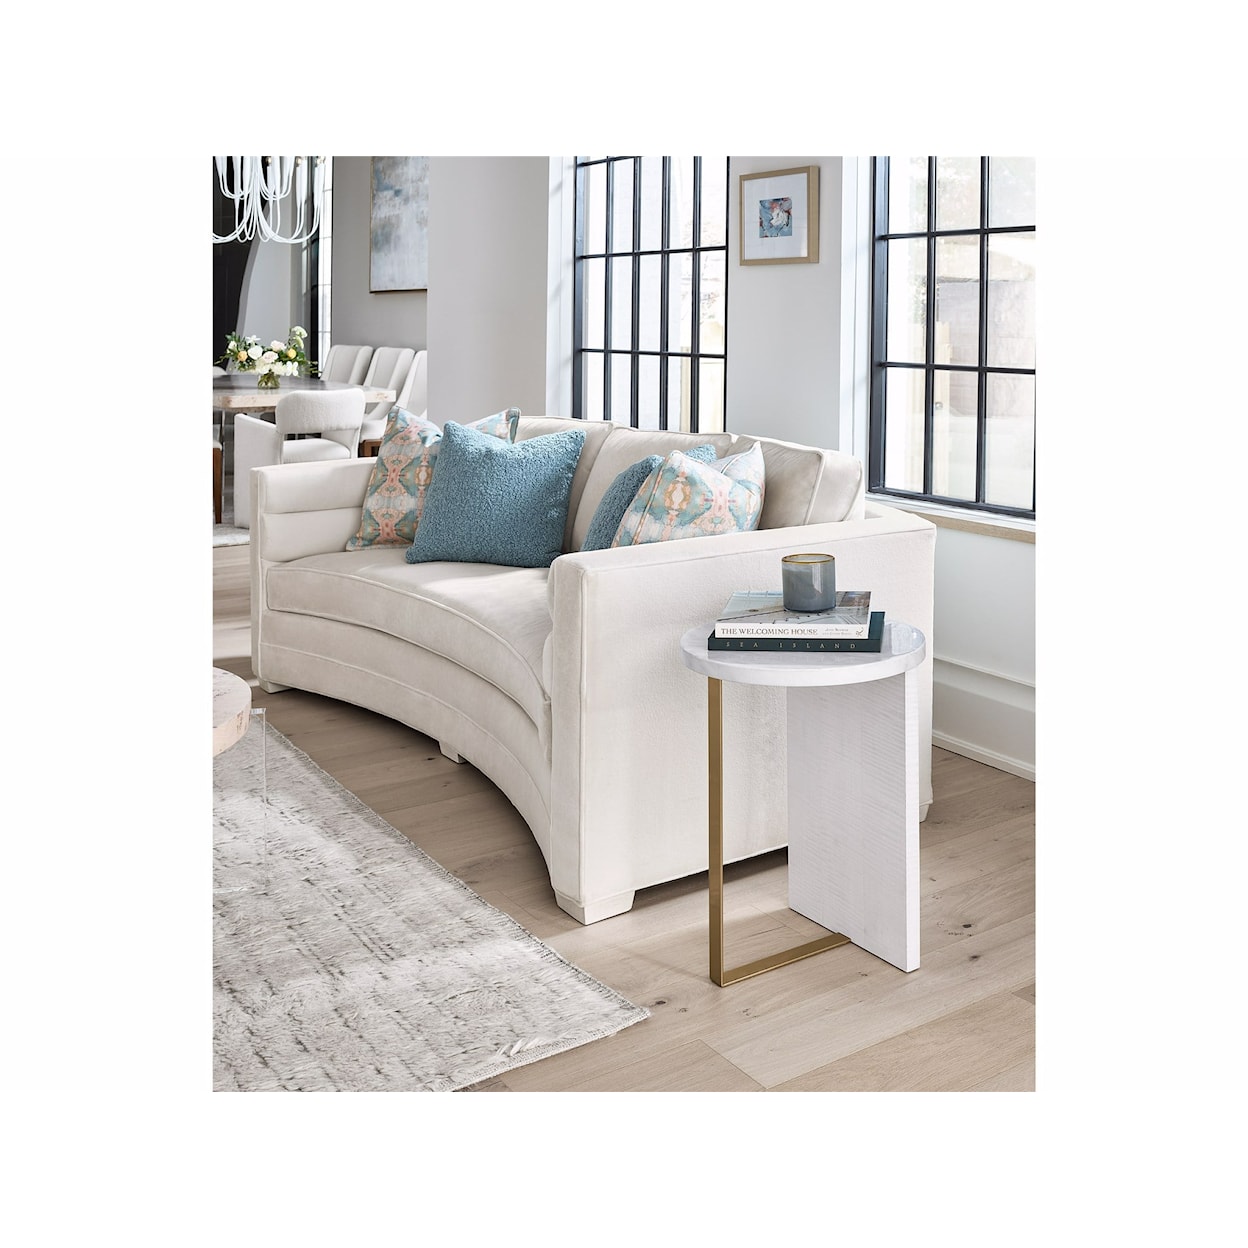 Universal Tranquility - Miranda Kerr Home Reverie Round Accent Table